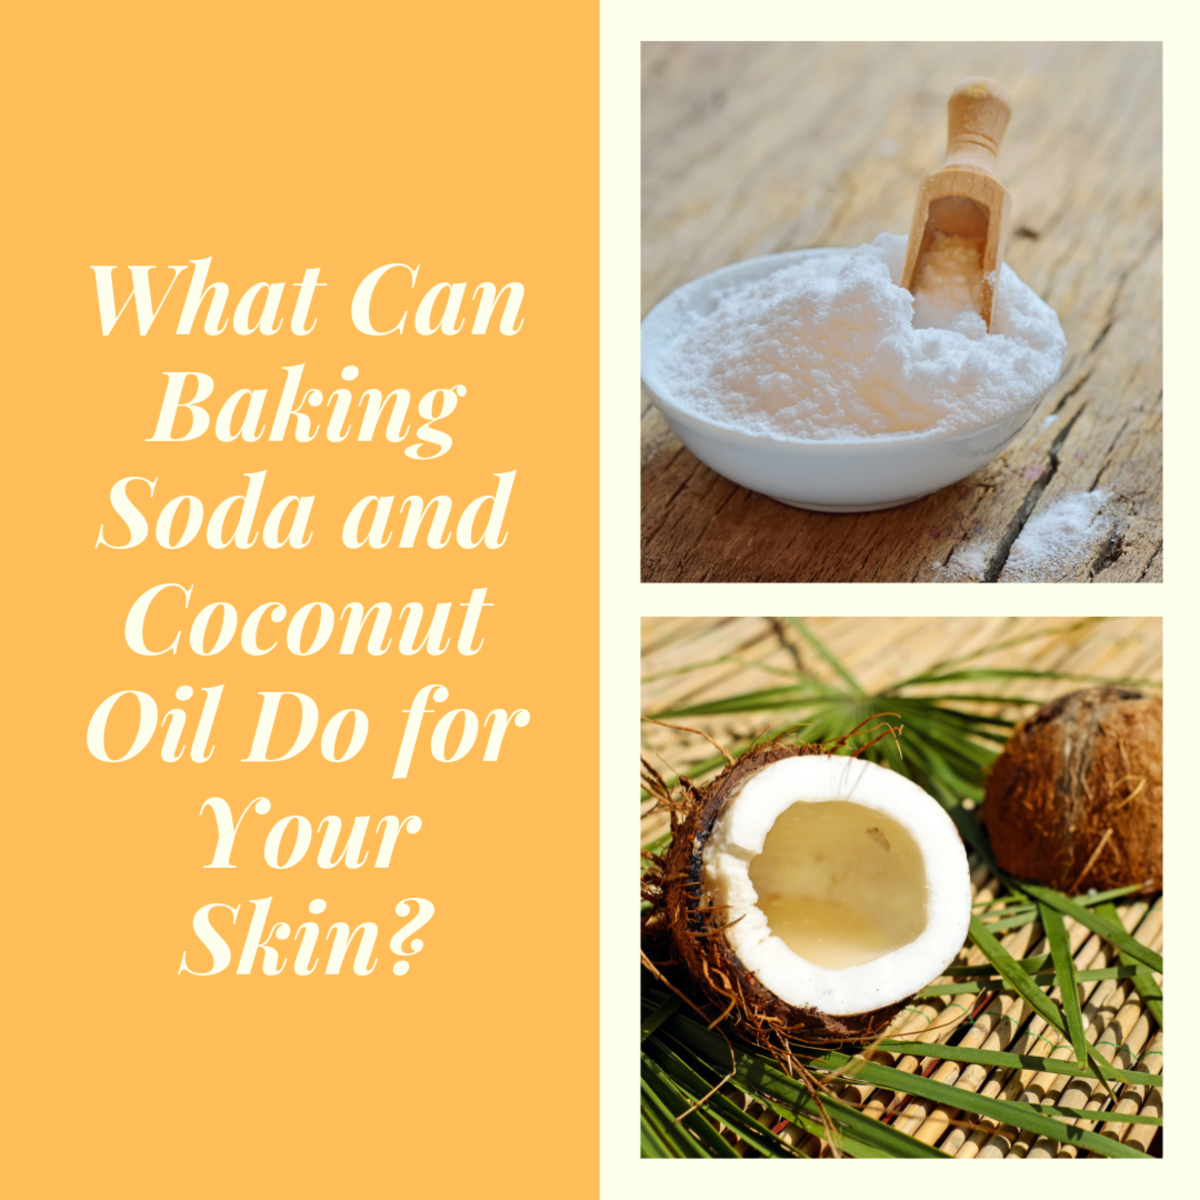 What Can Baking Soda and Coconut Oil Do for Your Skin? - Bellatory